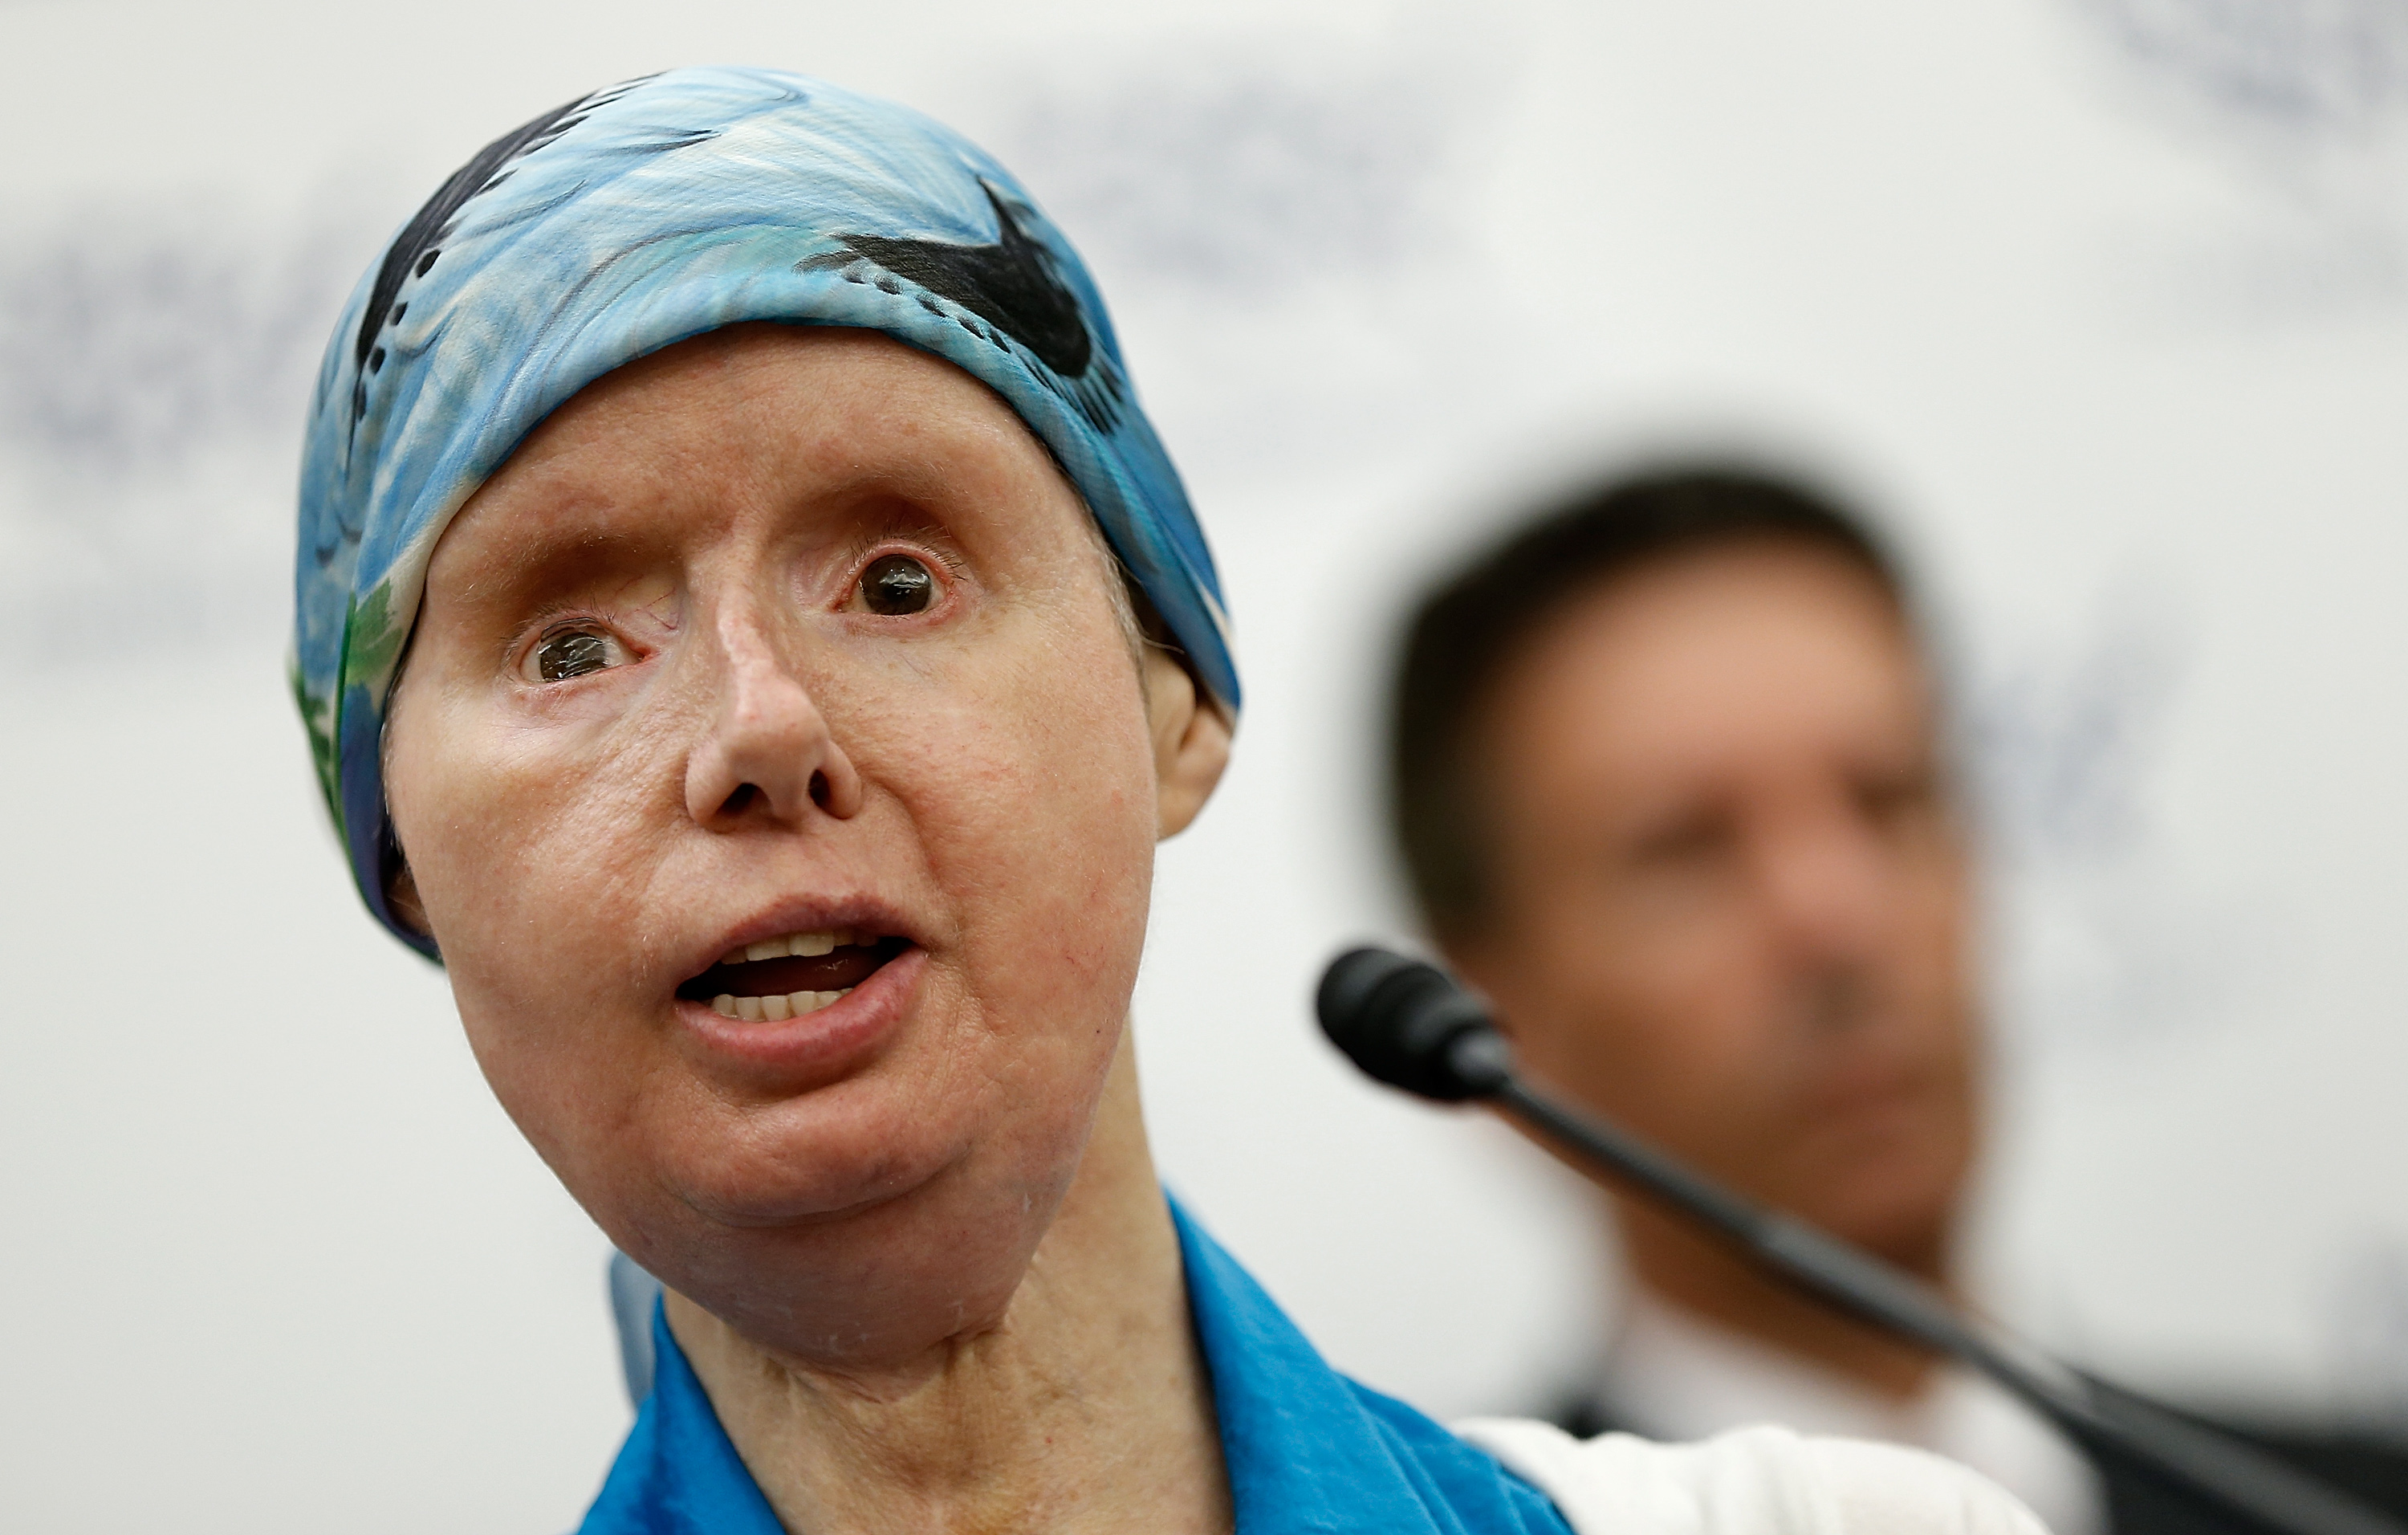 Charla Nash, the victim of a mauling by a pet chimp in Connecticut in 2009 and who underwent a face transplant, speaks at a press conference July 10, 2014 on Capitol Hill in Washington, DC. (Win McNamee/Getty Images)